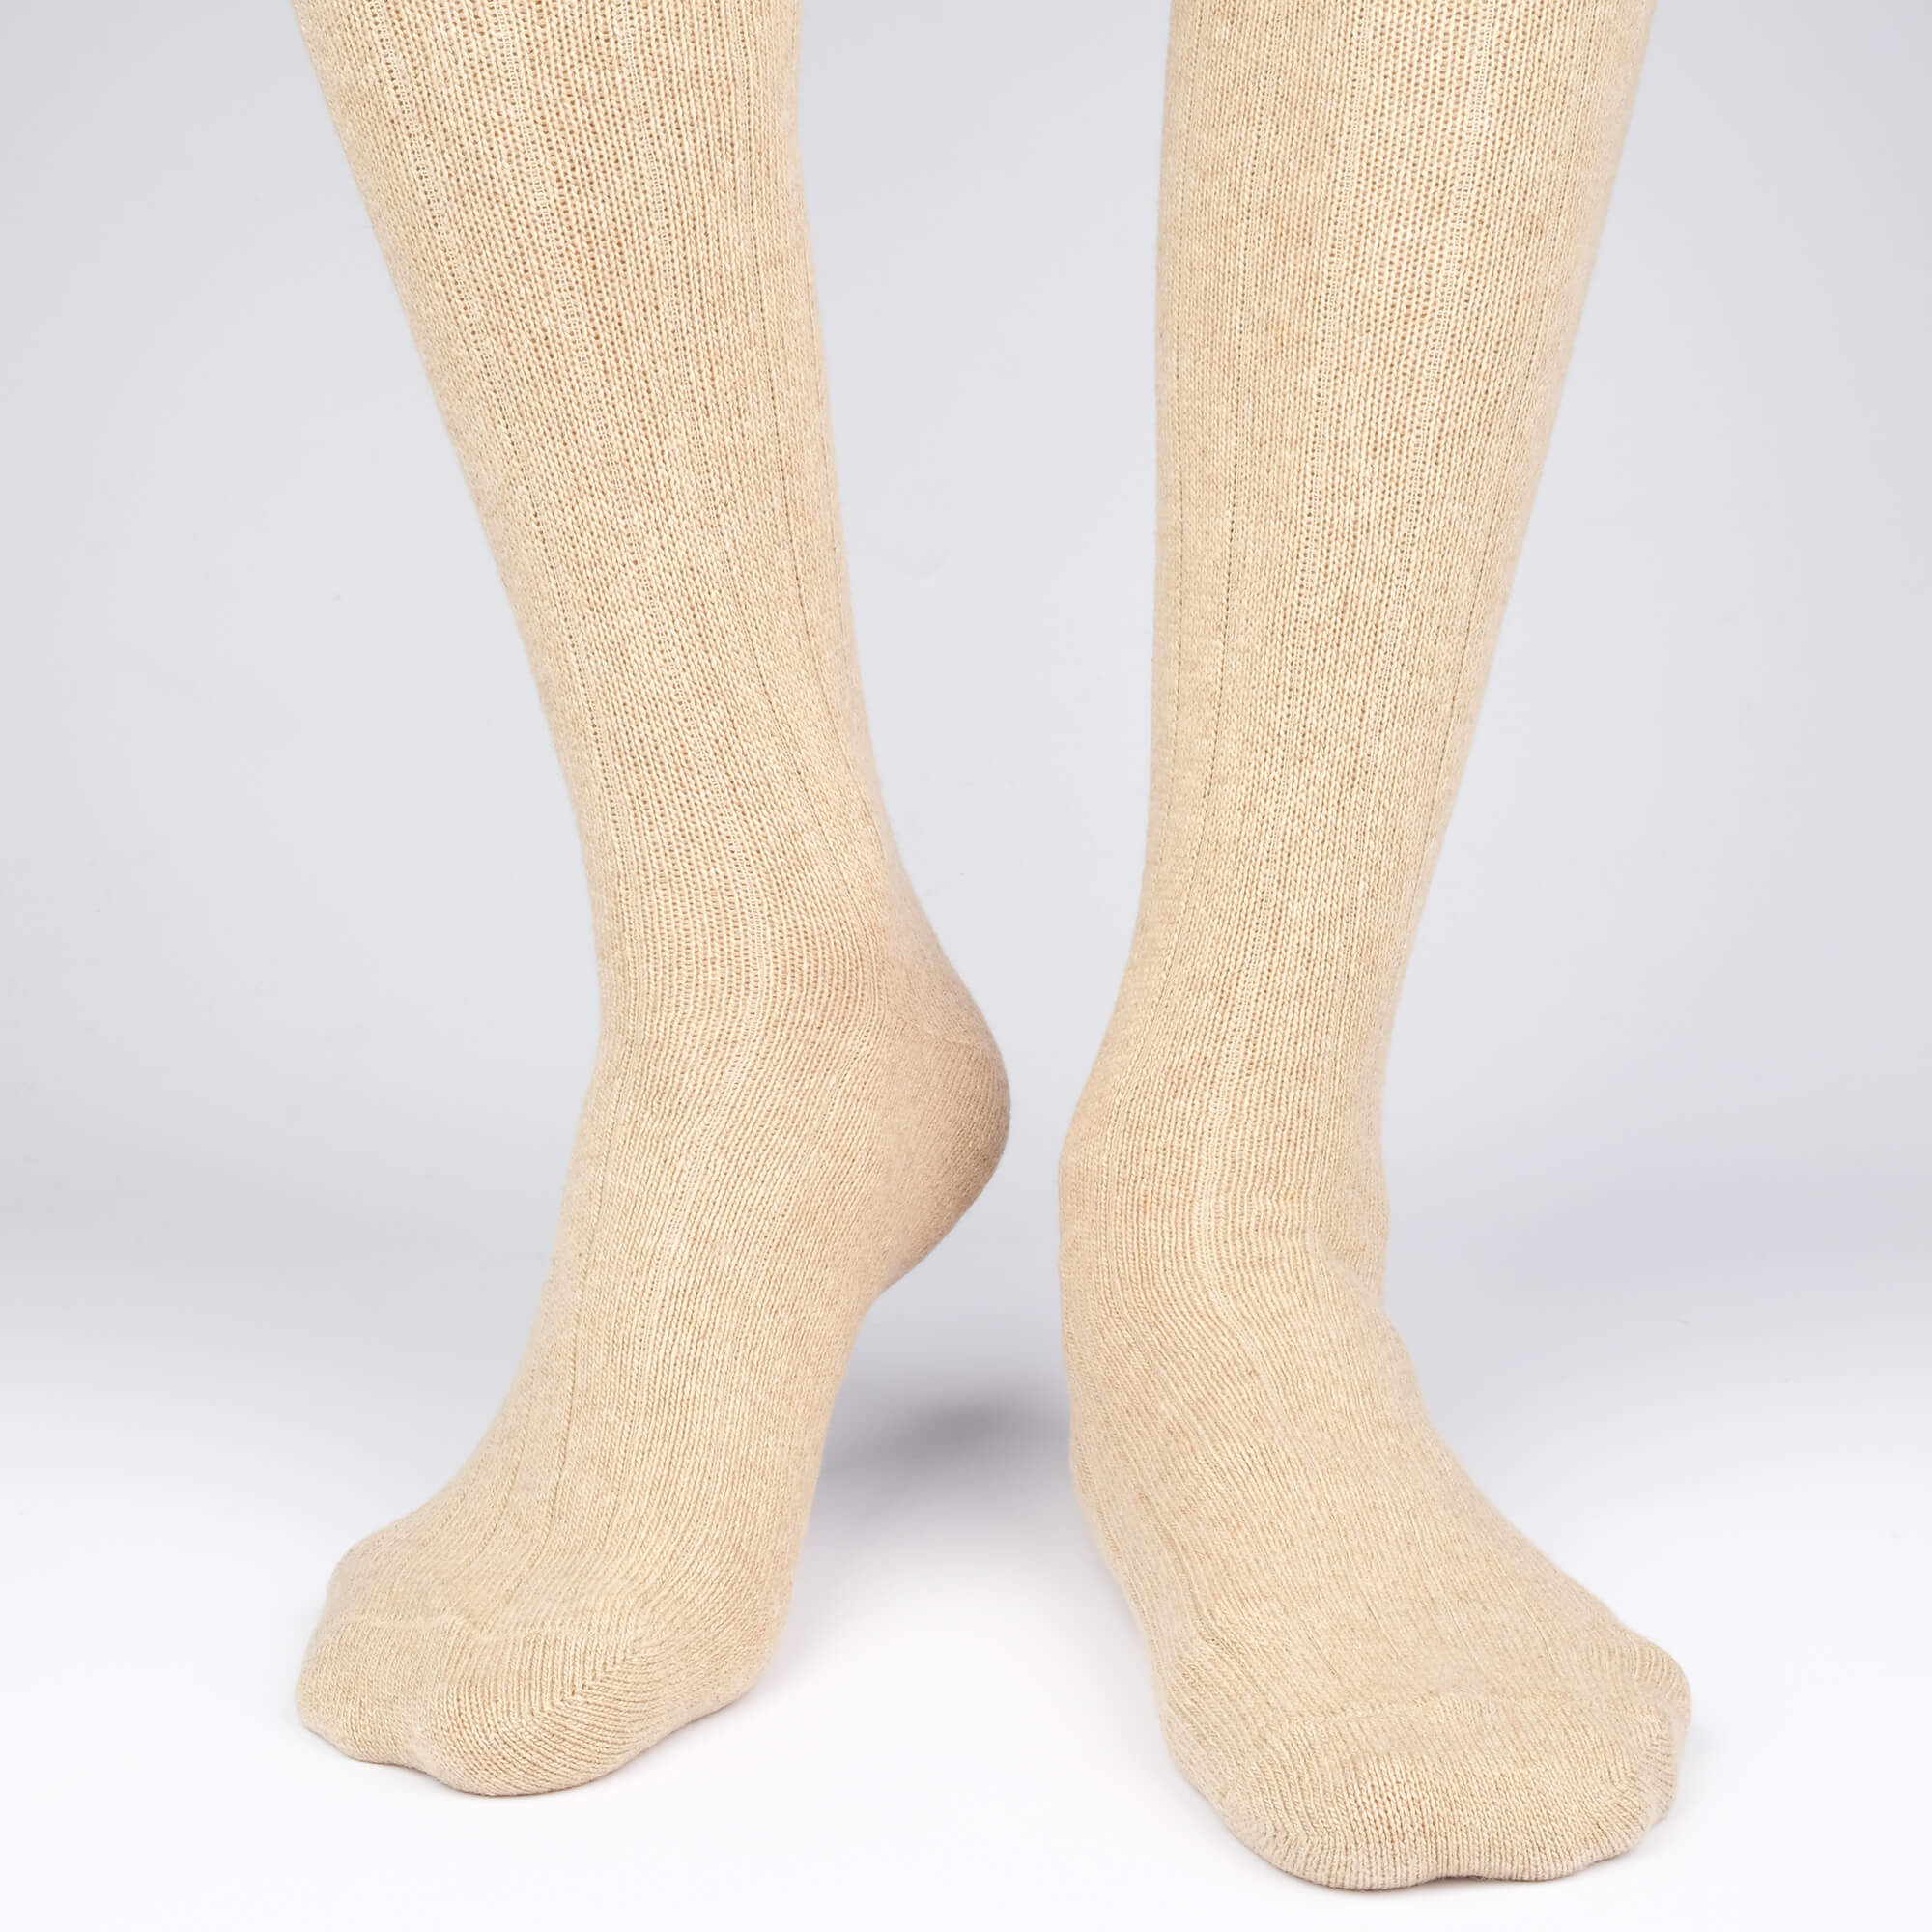 Men's Cashmere Knee High Sock Brown - made in Italy⎪Etiquette Clothiers